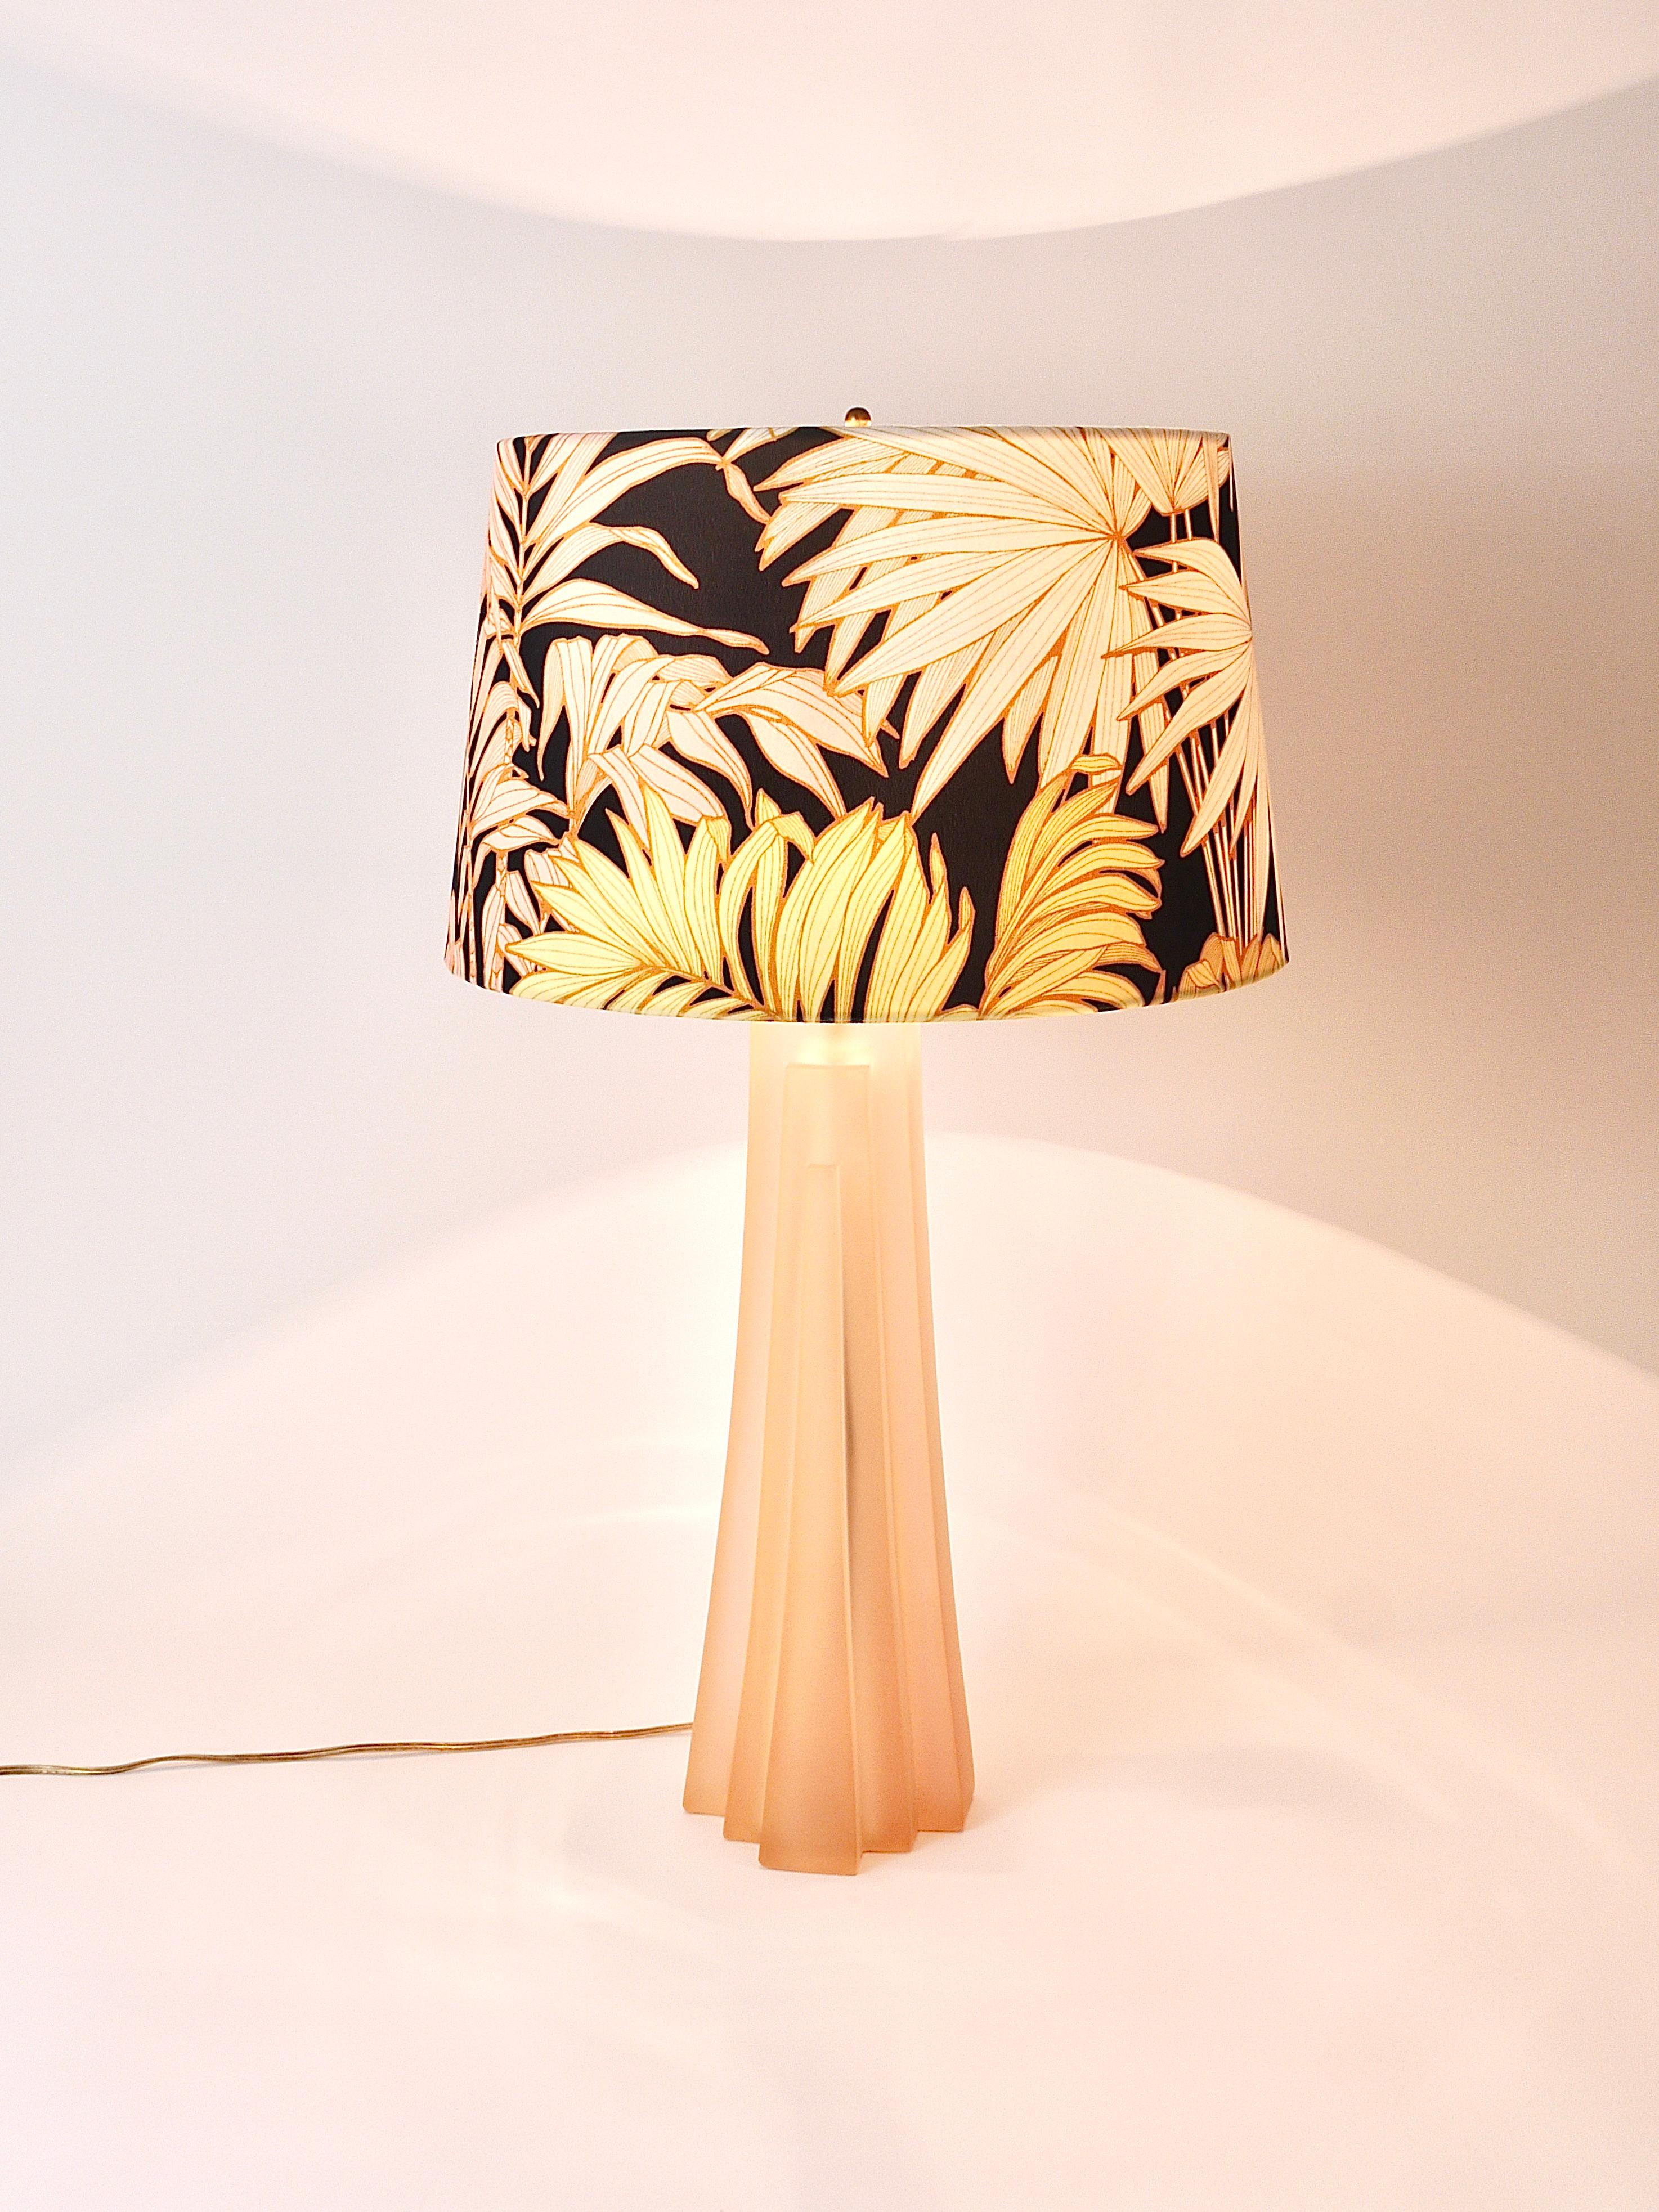 A beautiful architectural Art Deco style Hollywood Regency skyscraper table or side lamp from the 1980s, designed and signed by Paolo Gucci. It has a base made of translucent resin and a wonderful lampshade, refurbished with a premium floral leaf